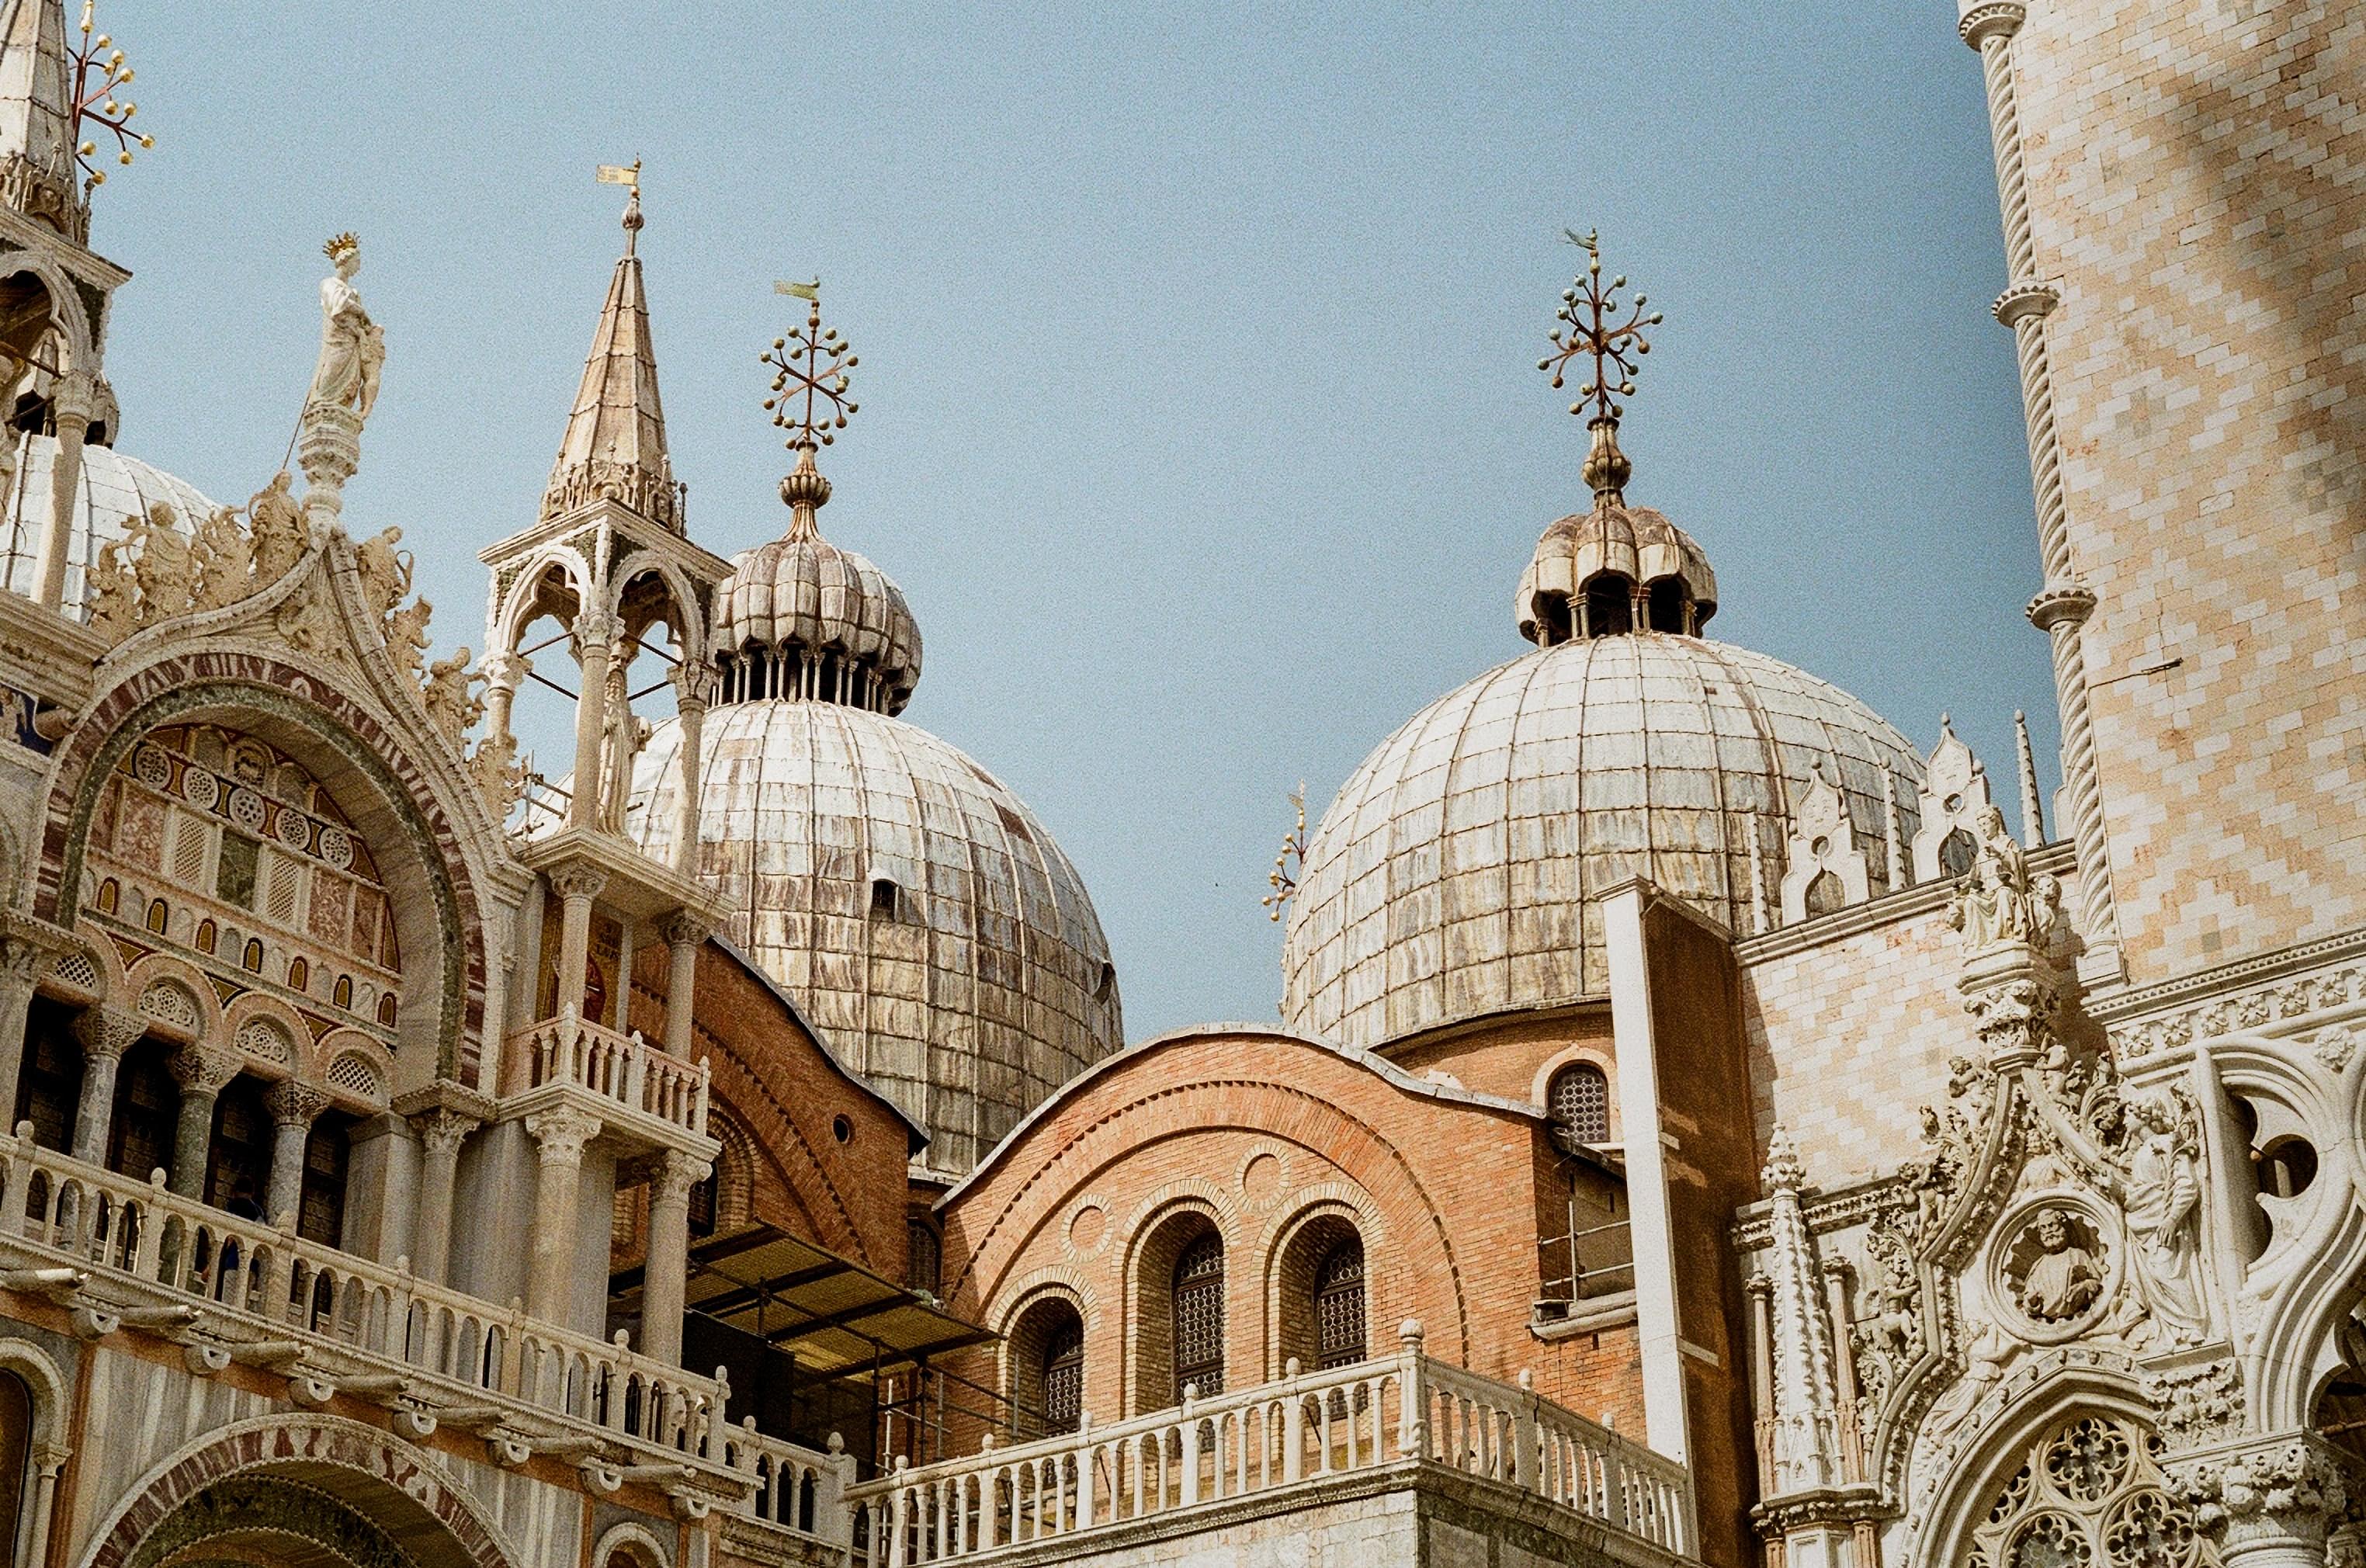 Places to Visit Near Doge's Palace